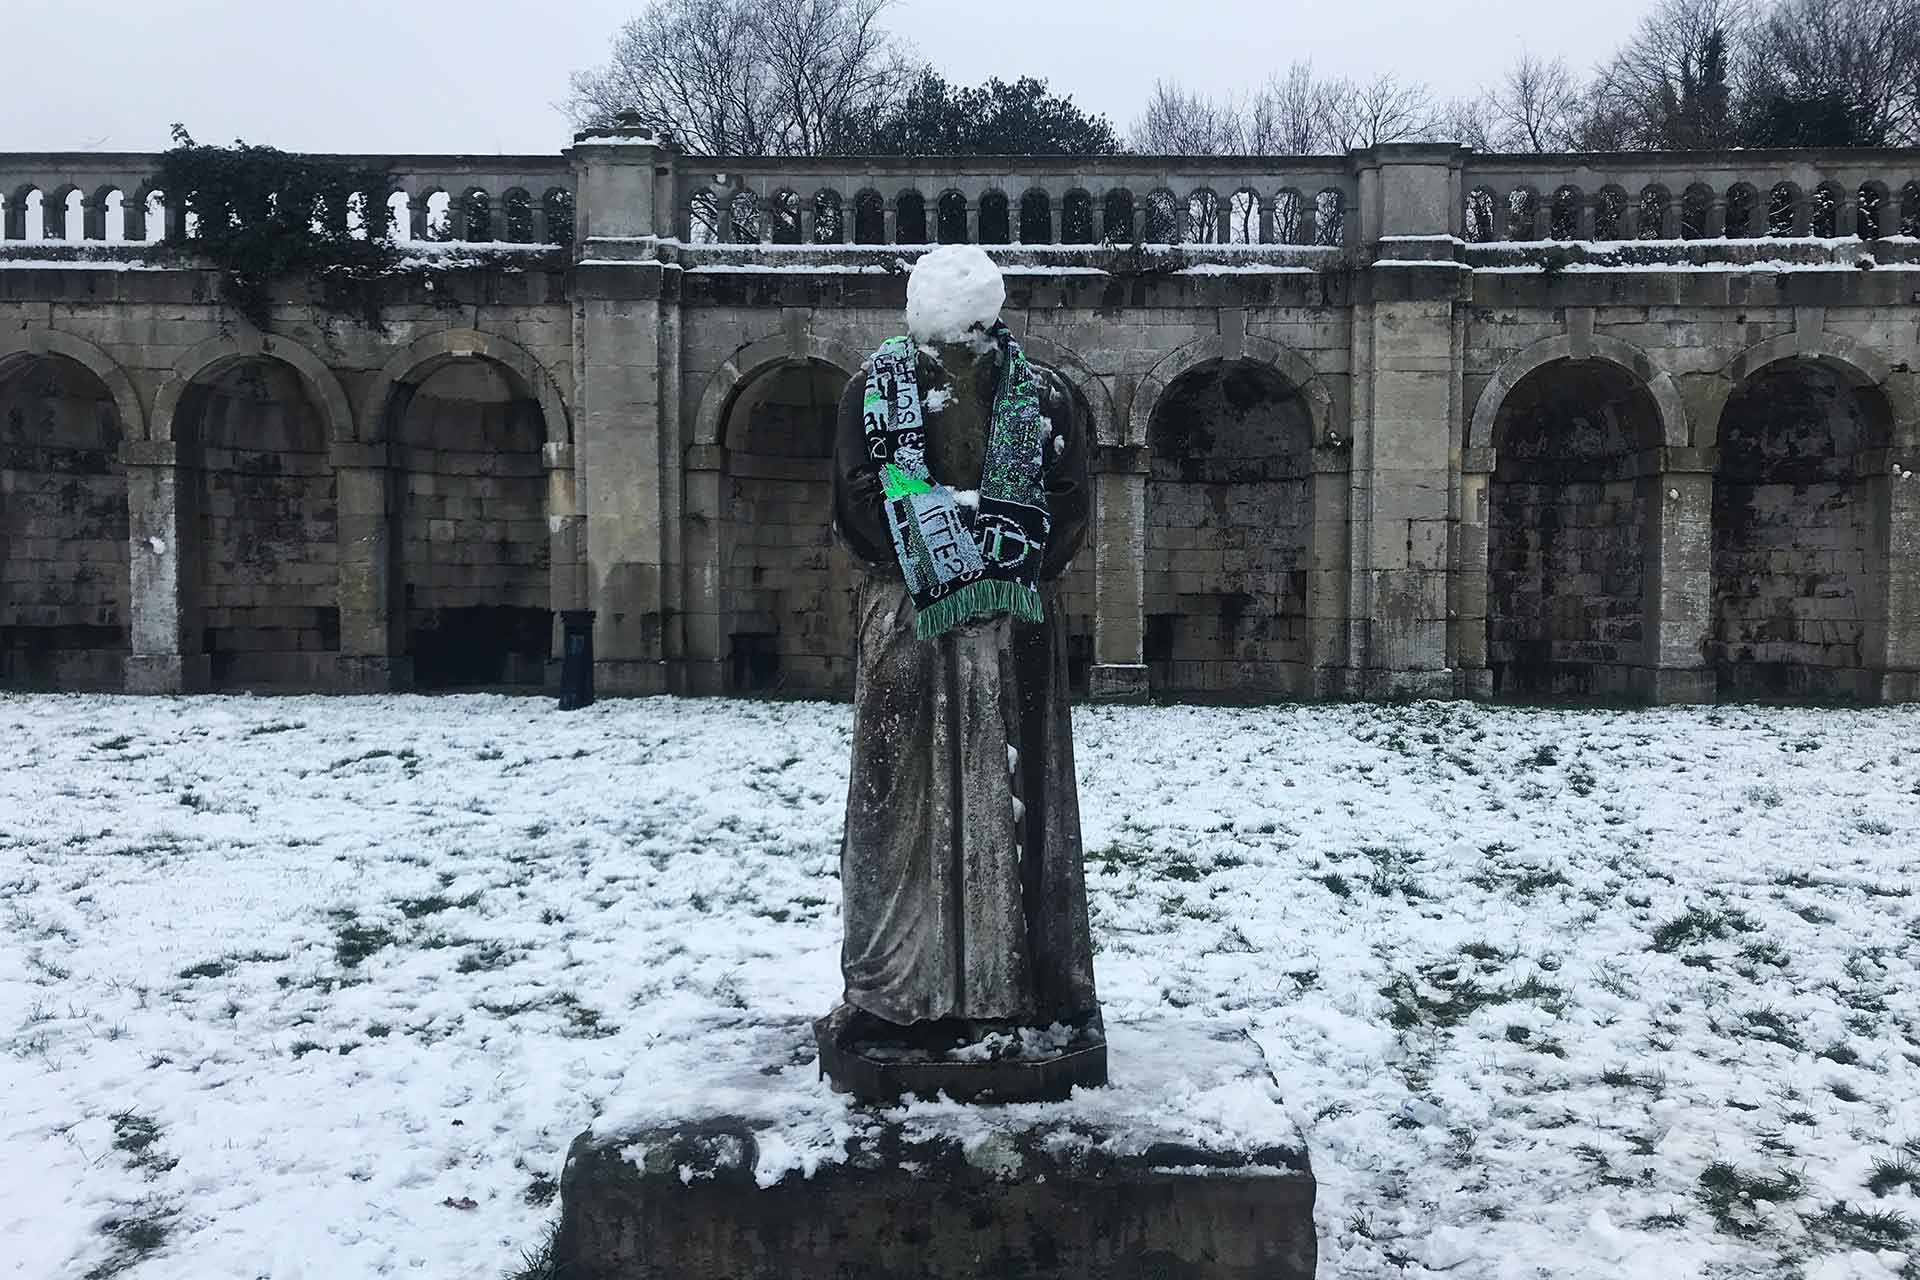 A playful image of the scarf wrapped around a statue on a cold winters day surrounded by snow